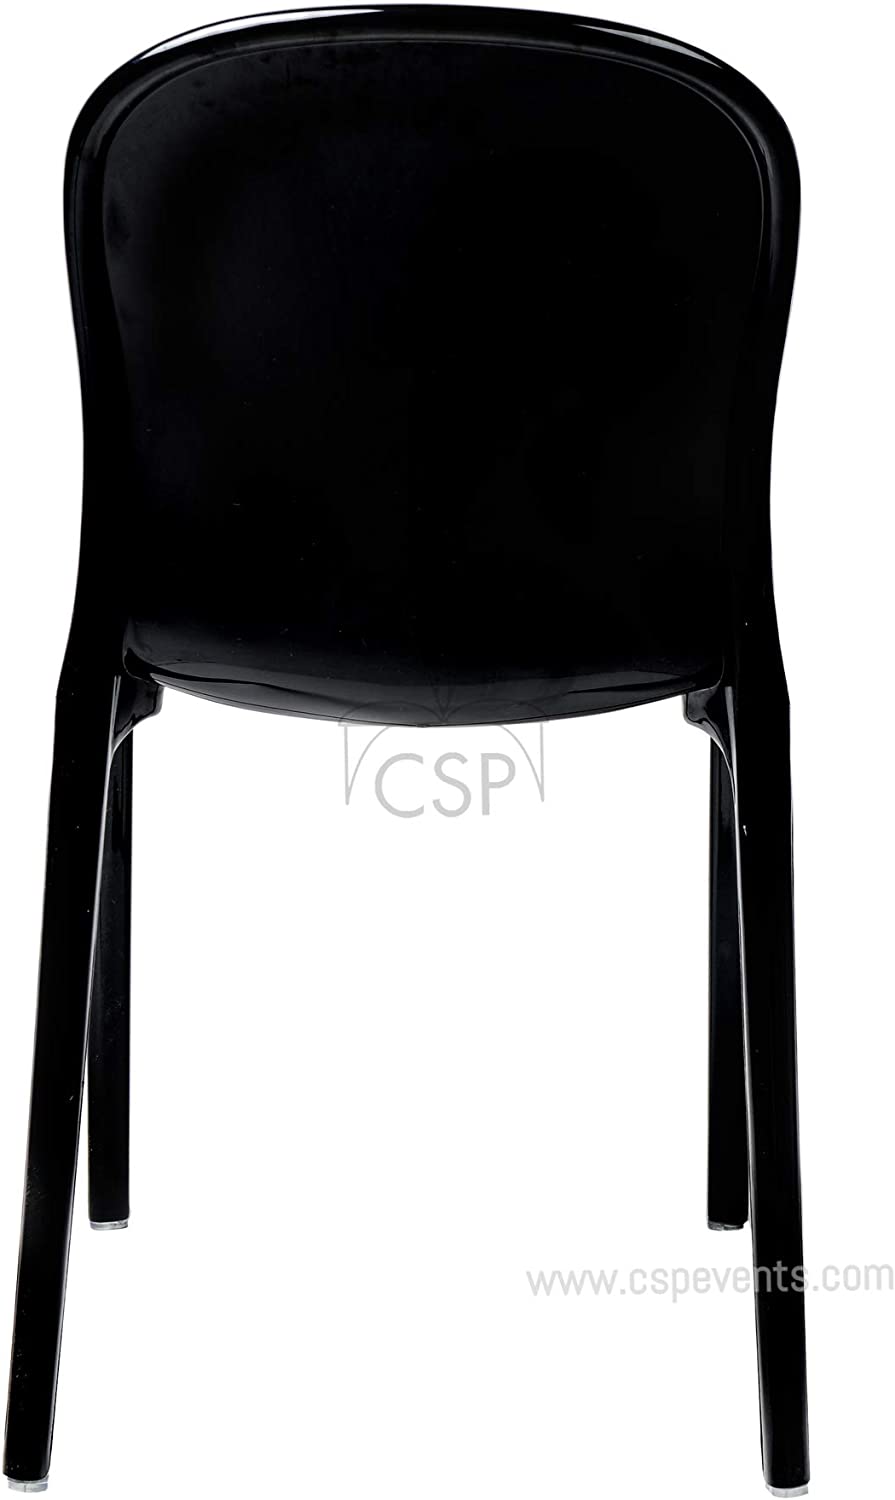 Commercial Seating Products Black Genoa Chairs